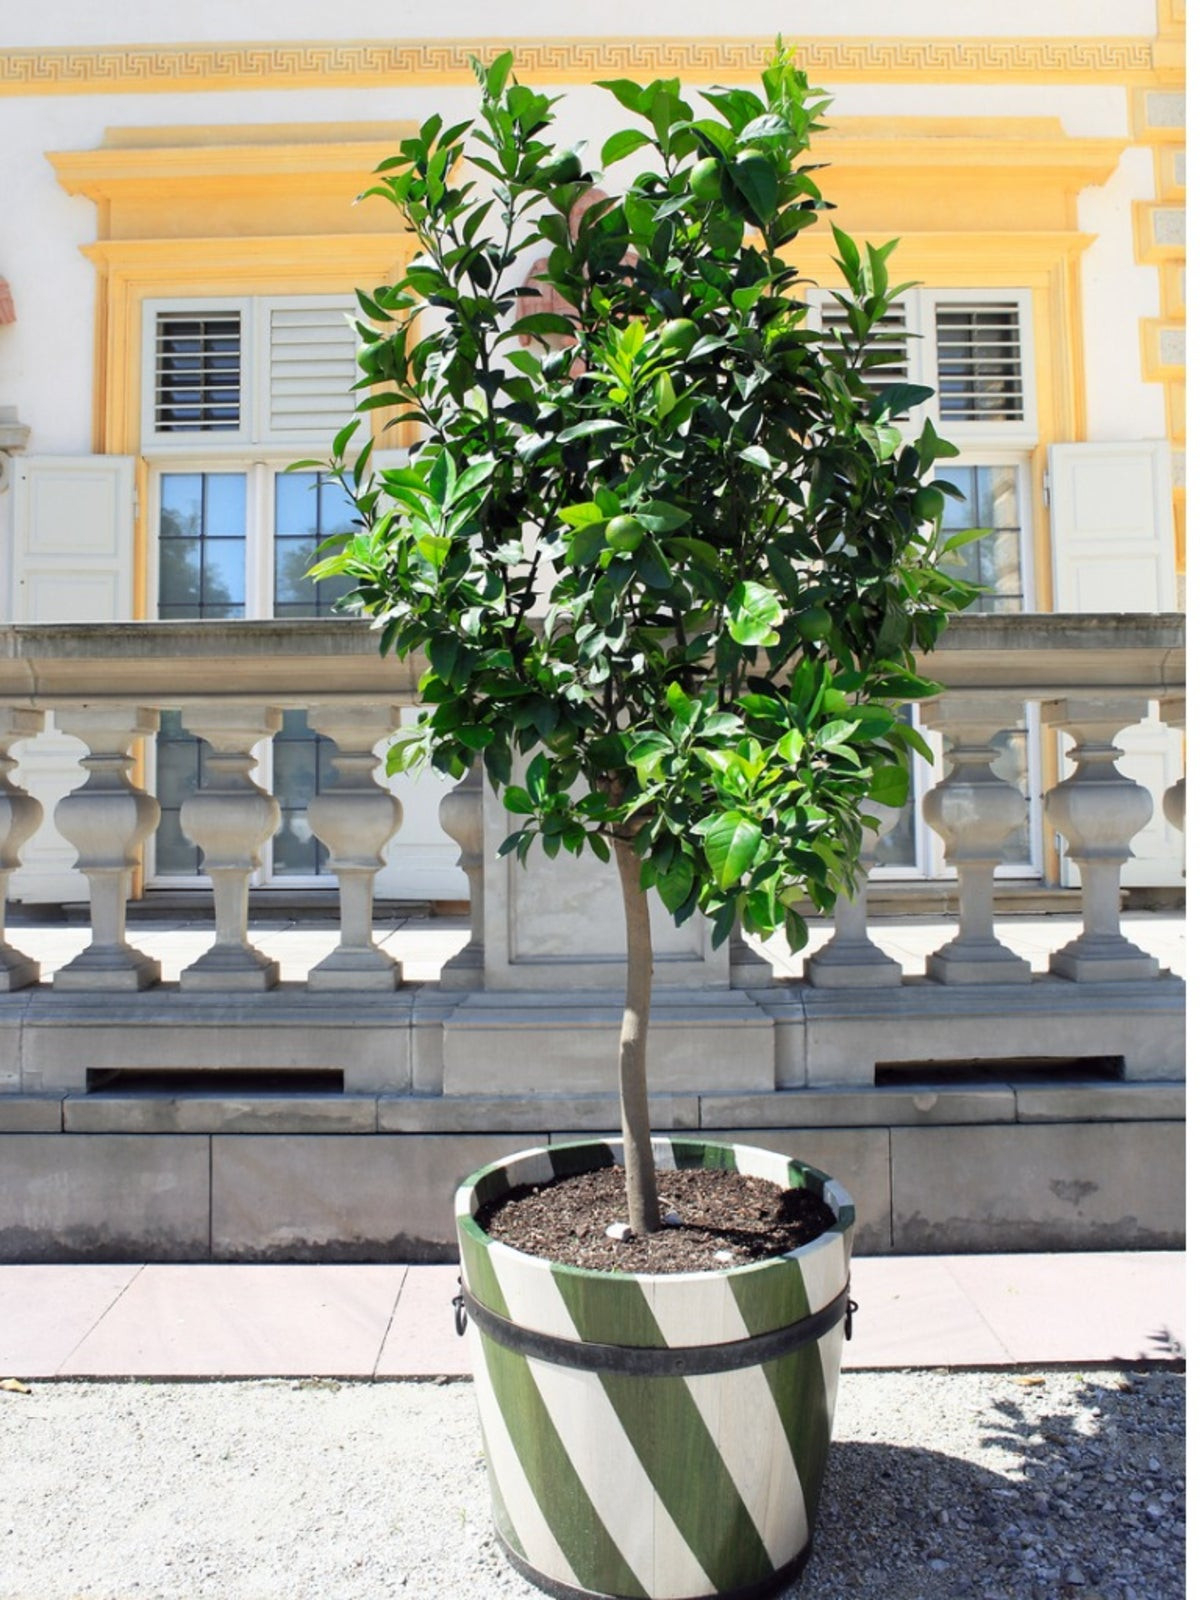 Growing Lime Trees In Containers - How To Care For Lime Trees In A Pot